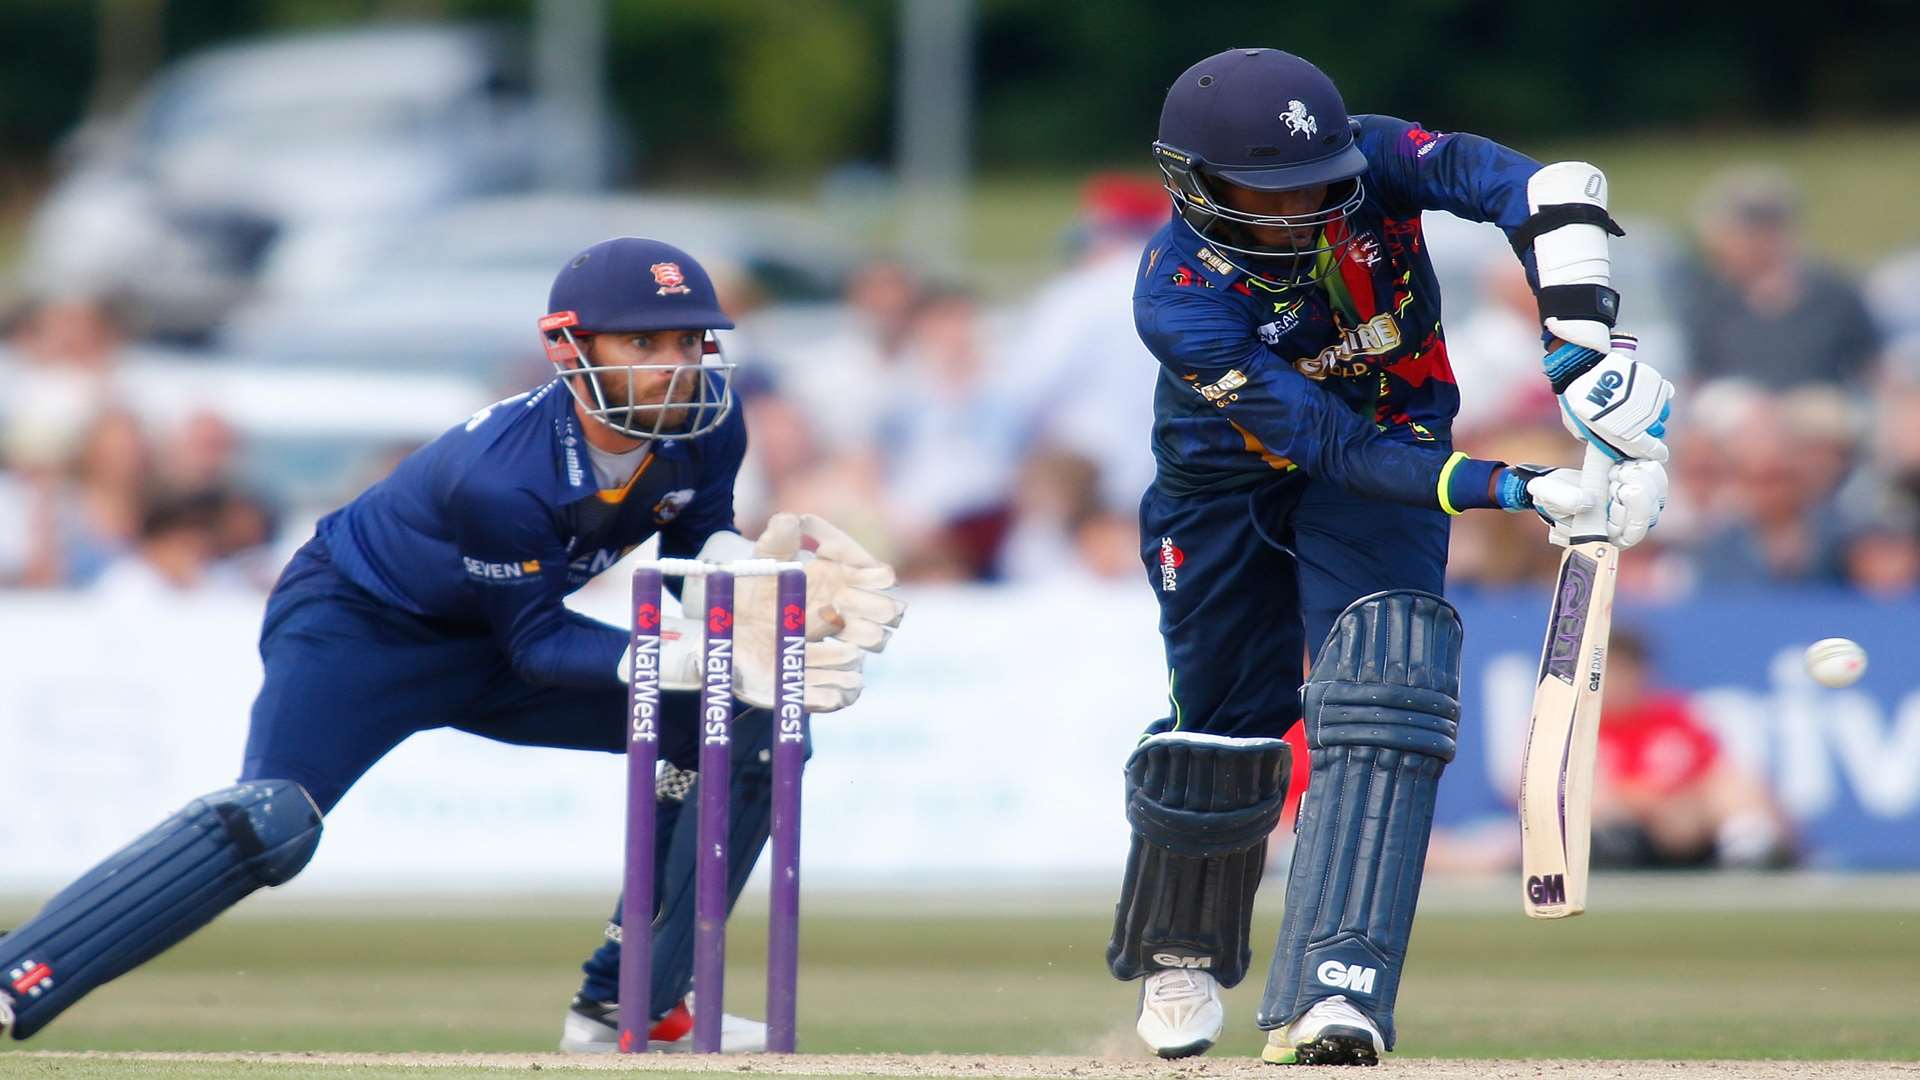 Daniel Bell-Drummond smashed four sixes in his 90 not out against Essex Eagles Picture: Andy Jones